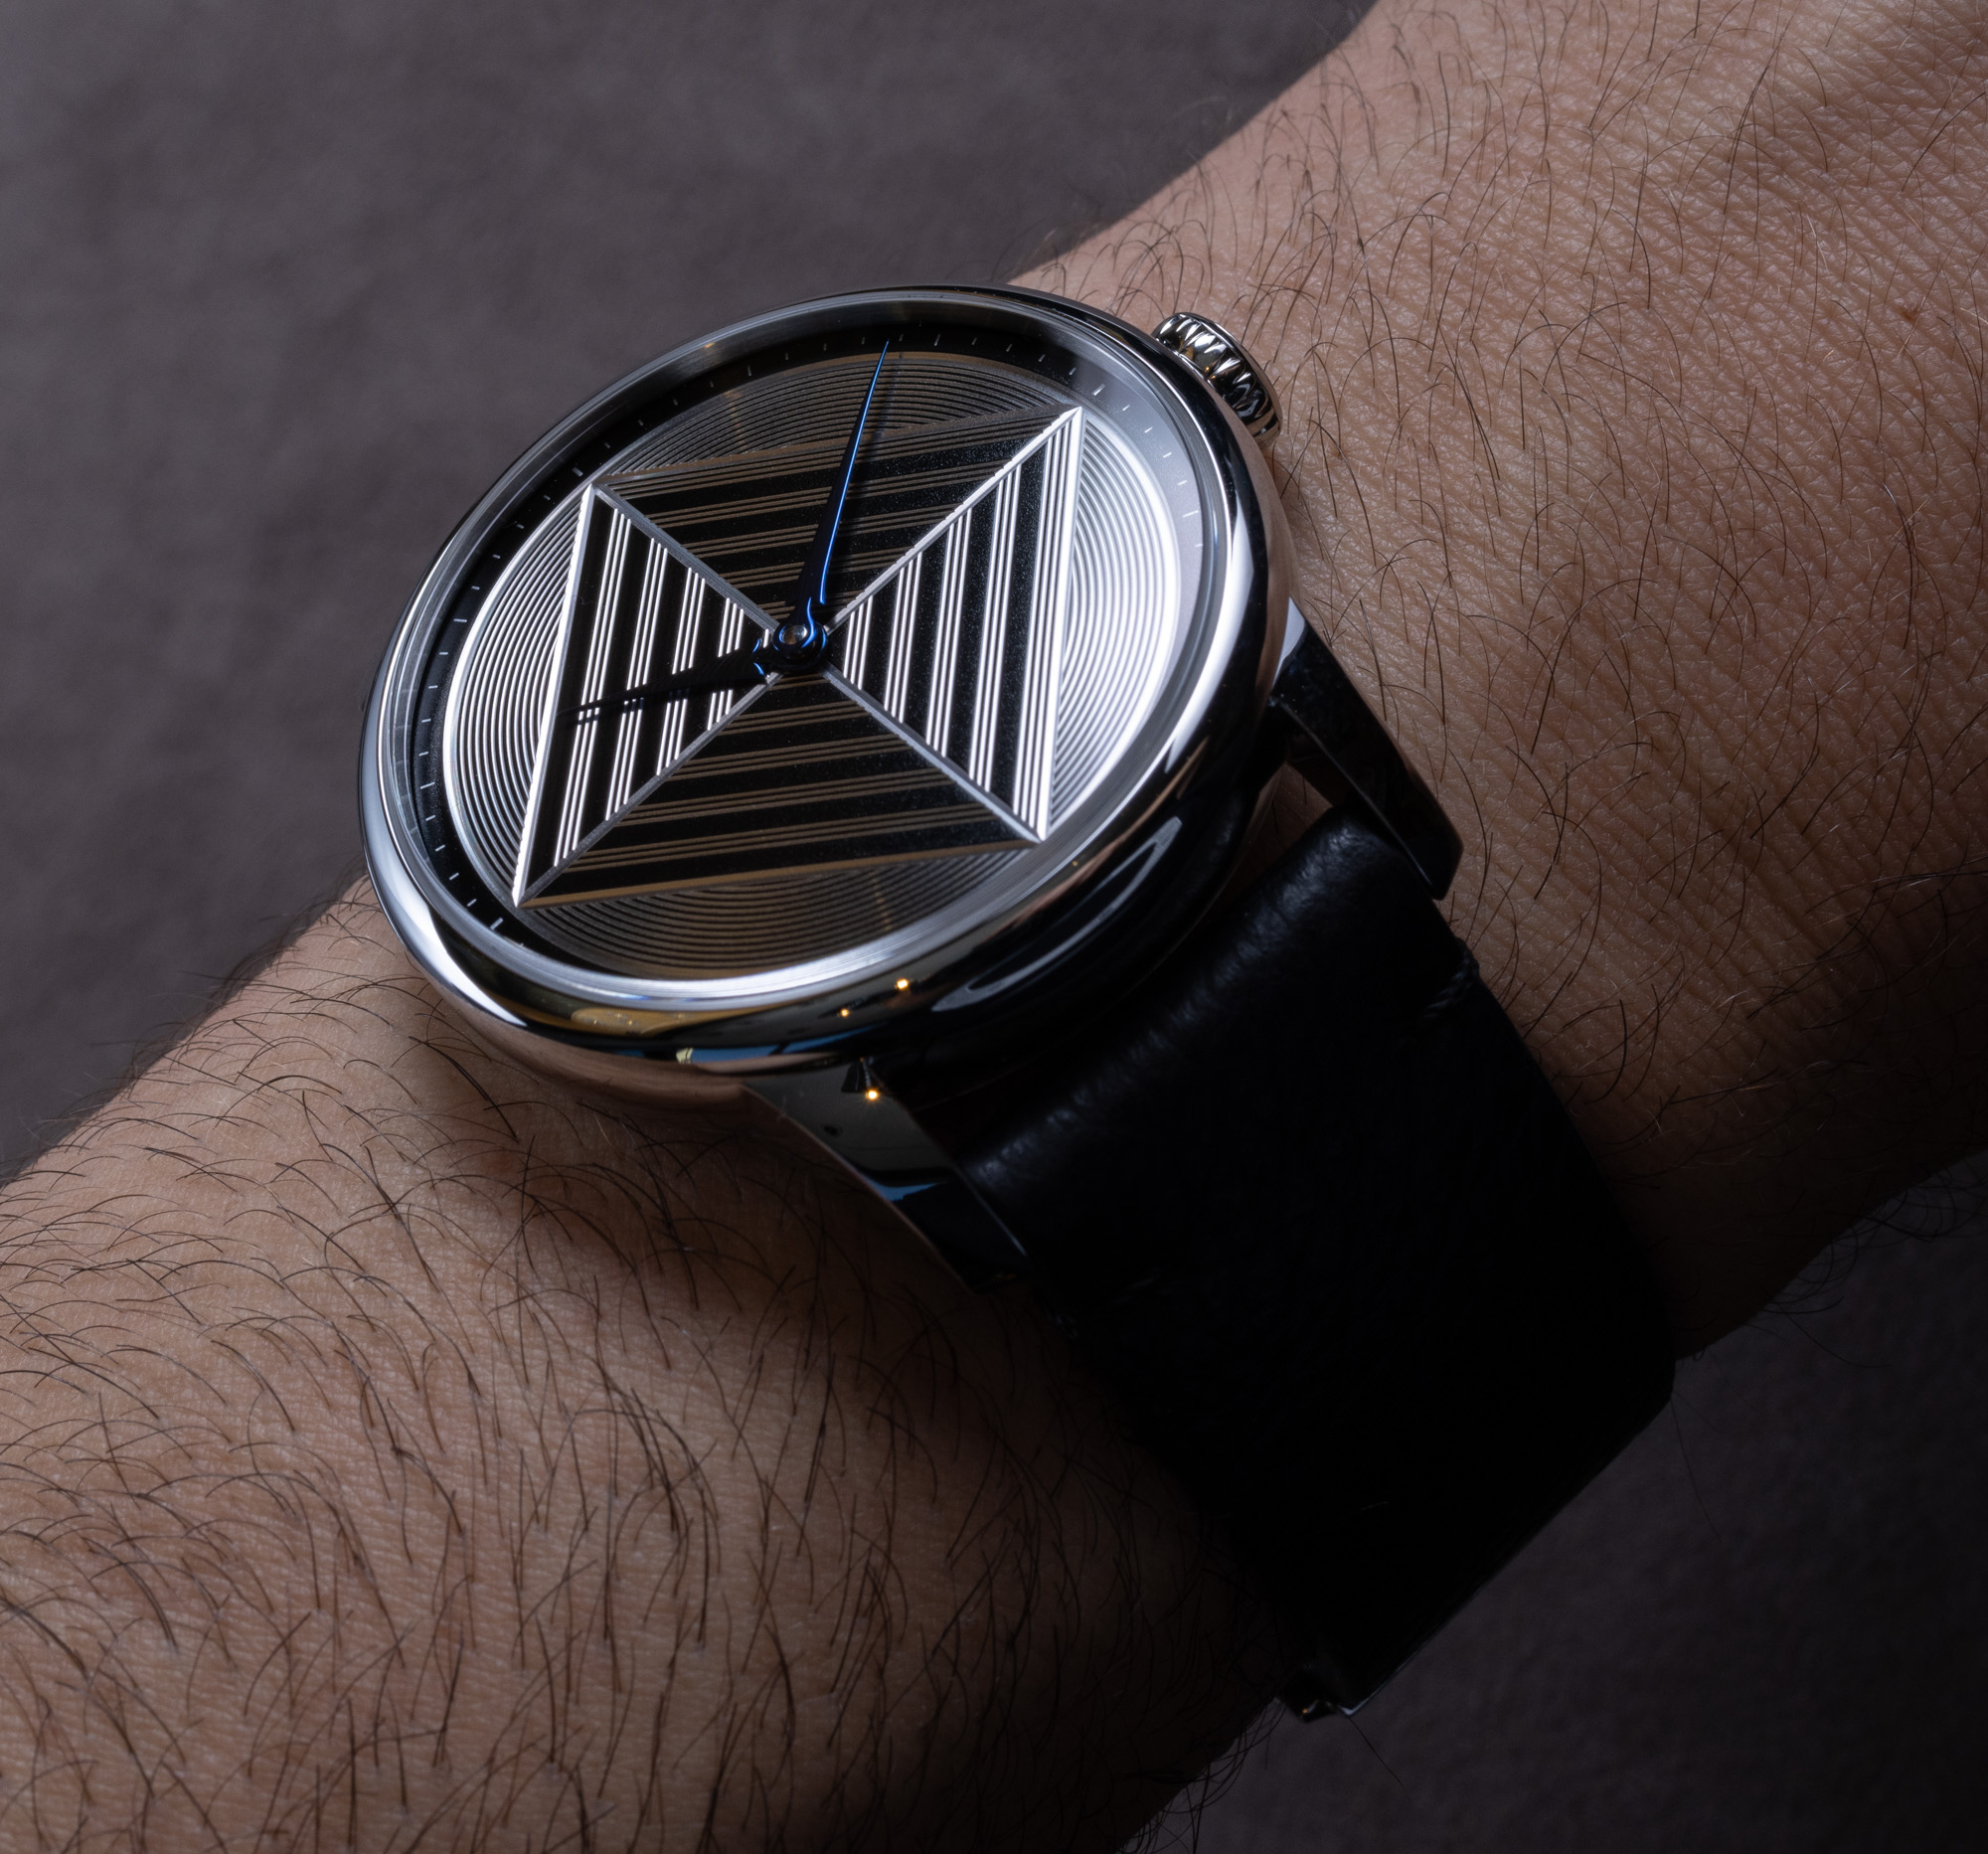 Louis Erard Excellence Guilloché Main Limited Edition - Hands-On, Price